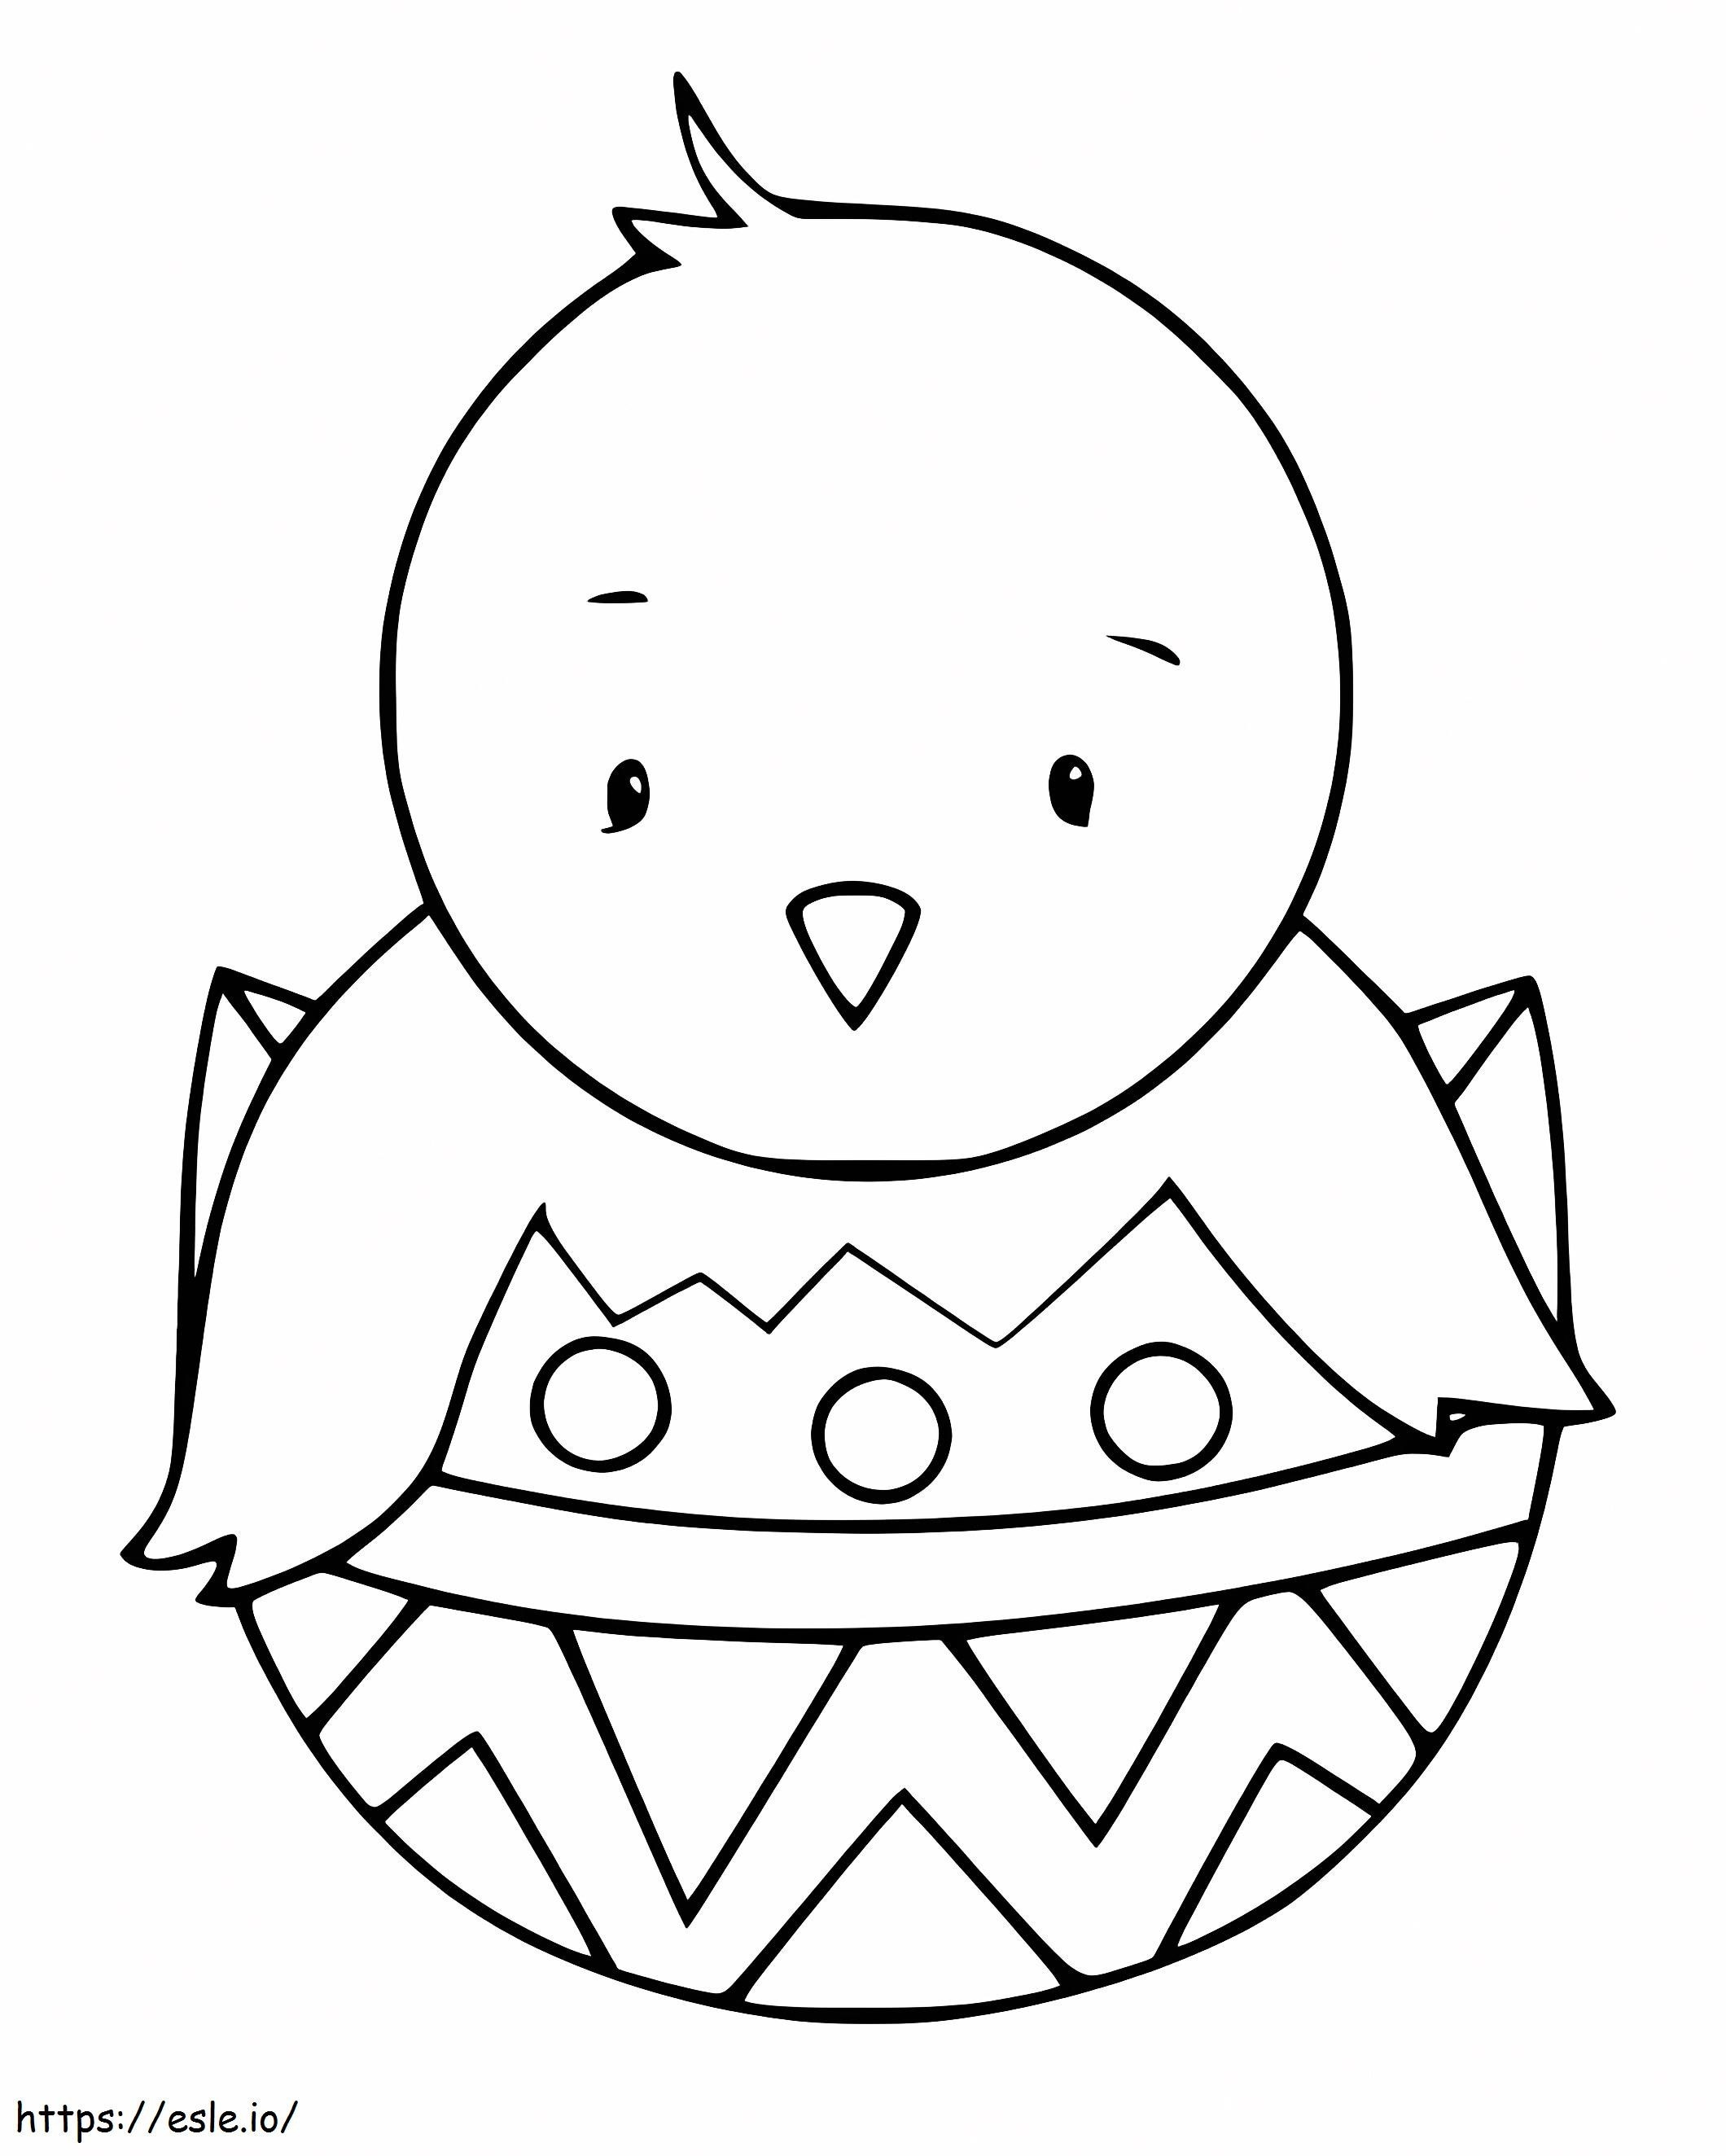 Easy Easter Chick coloring page